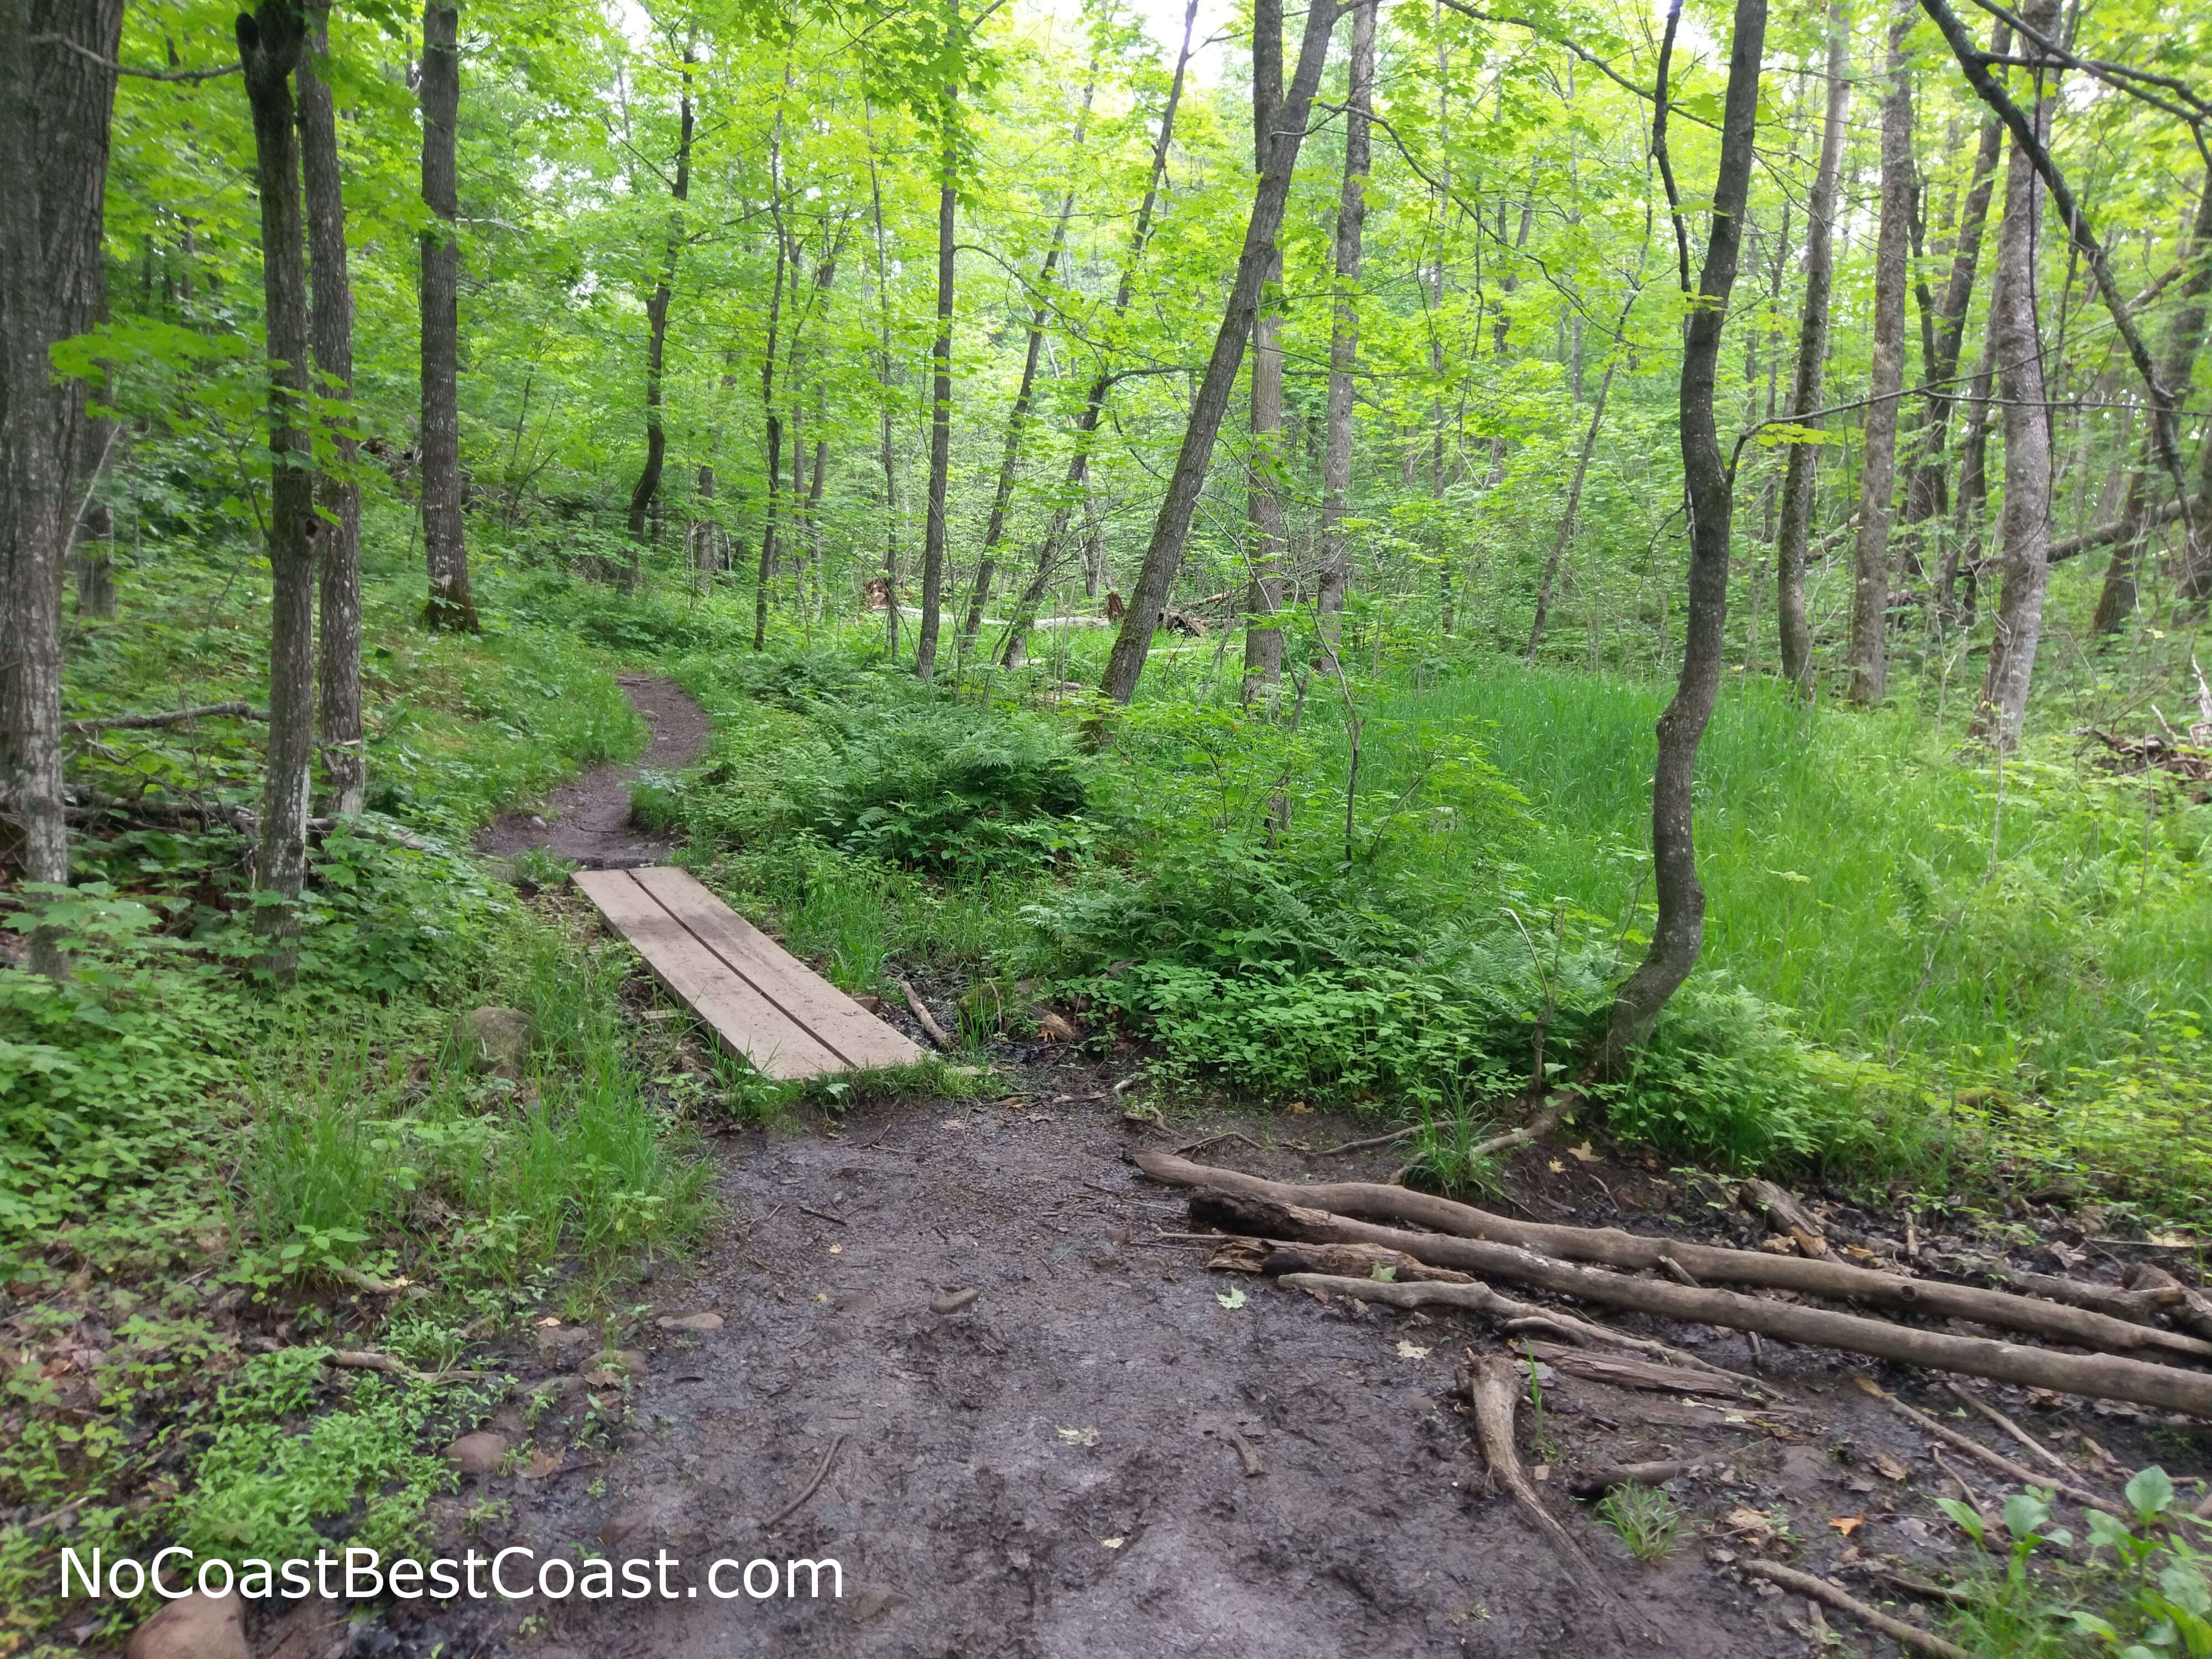 Wooden planks on the quiet forest trail